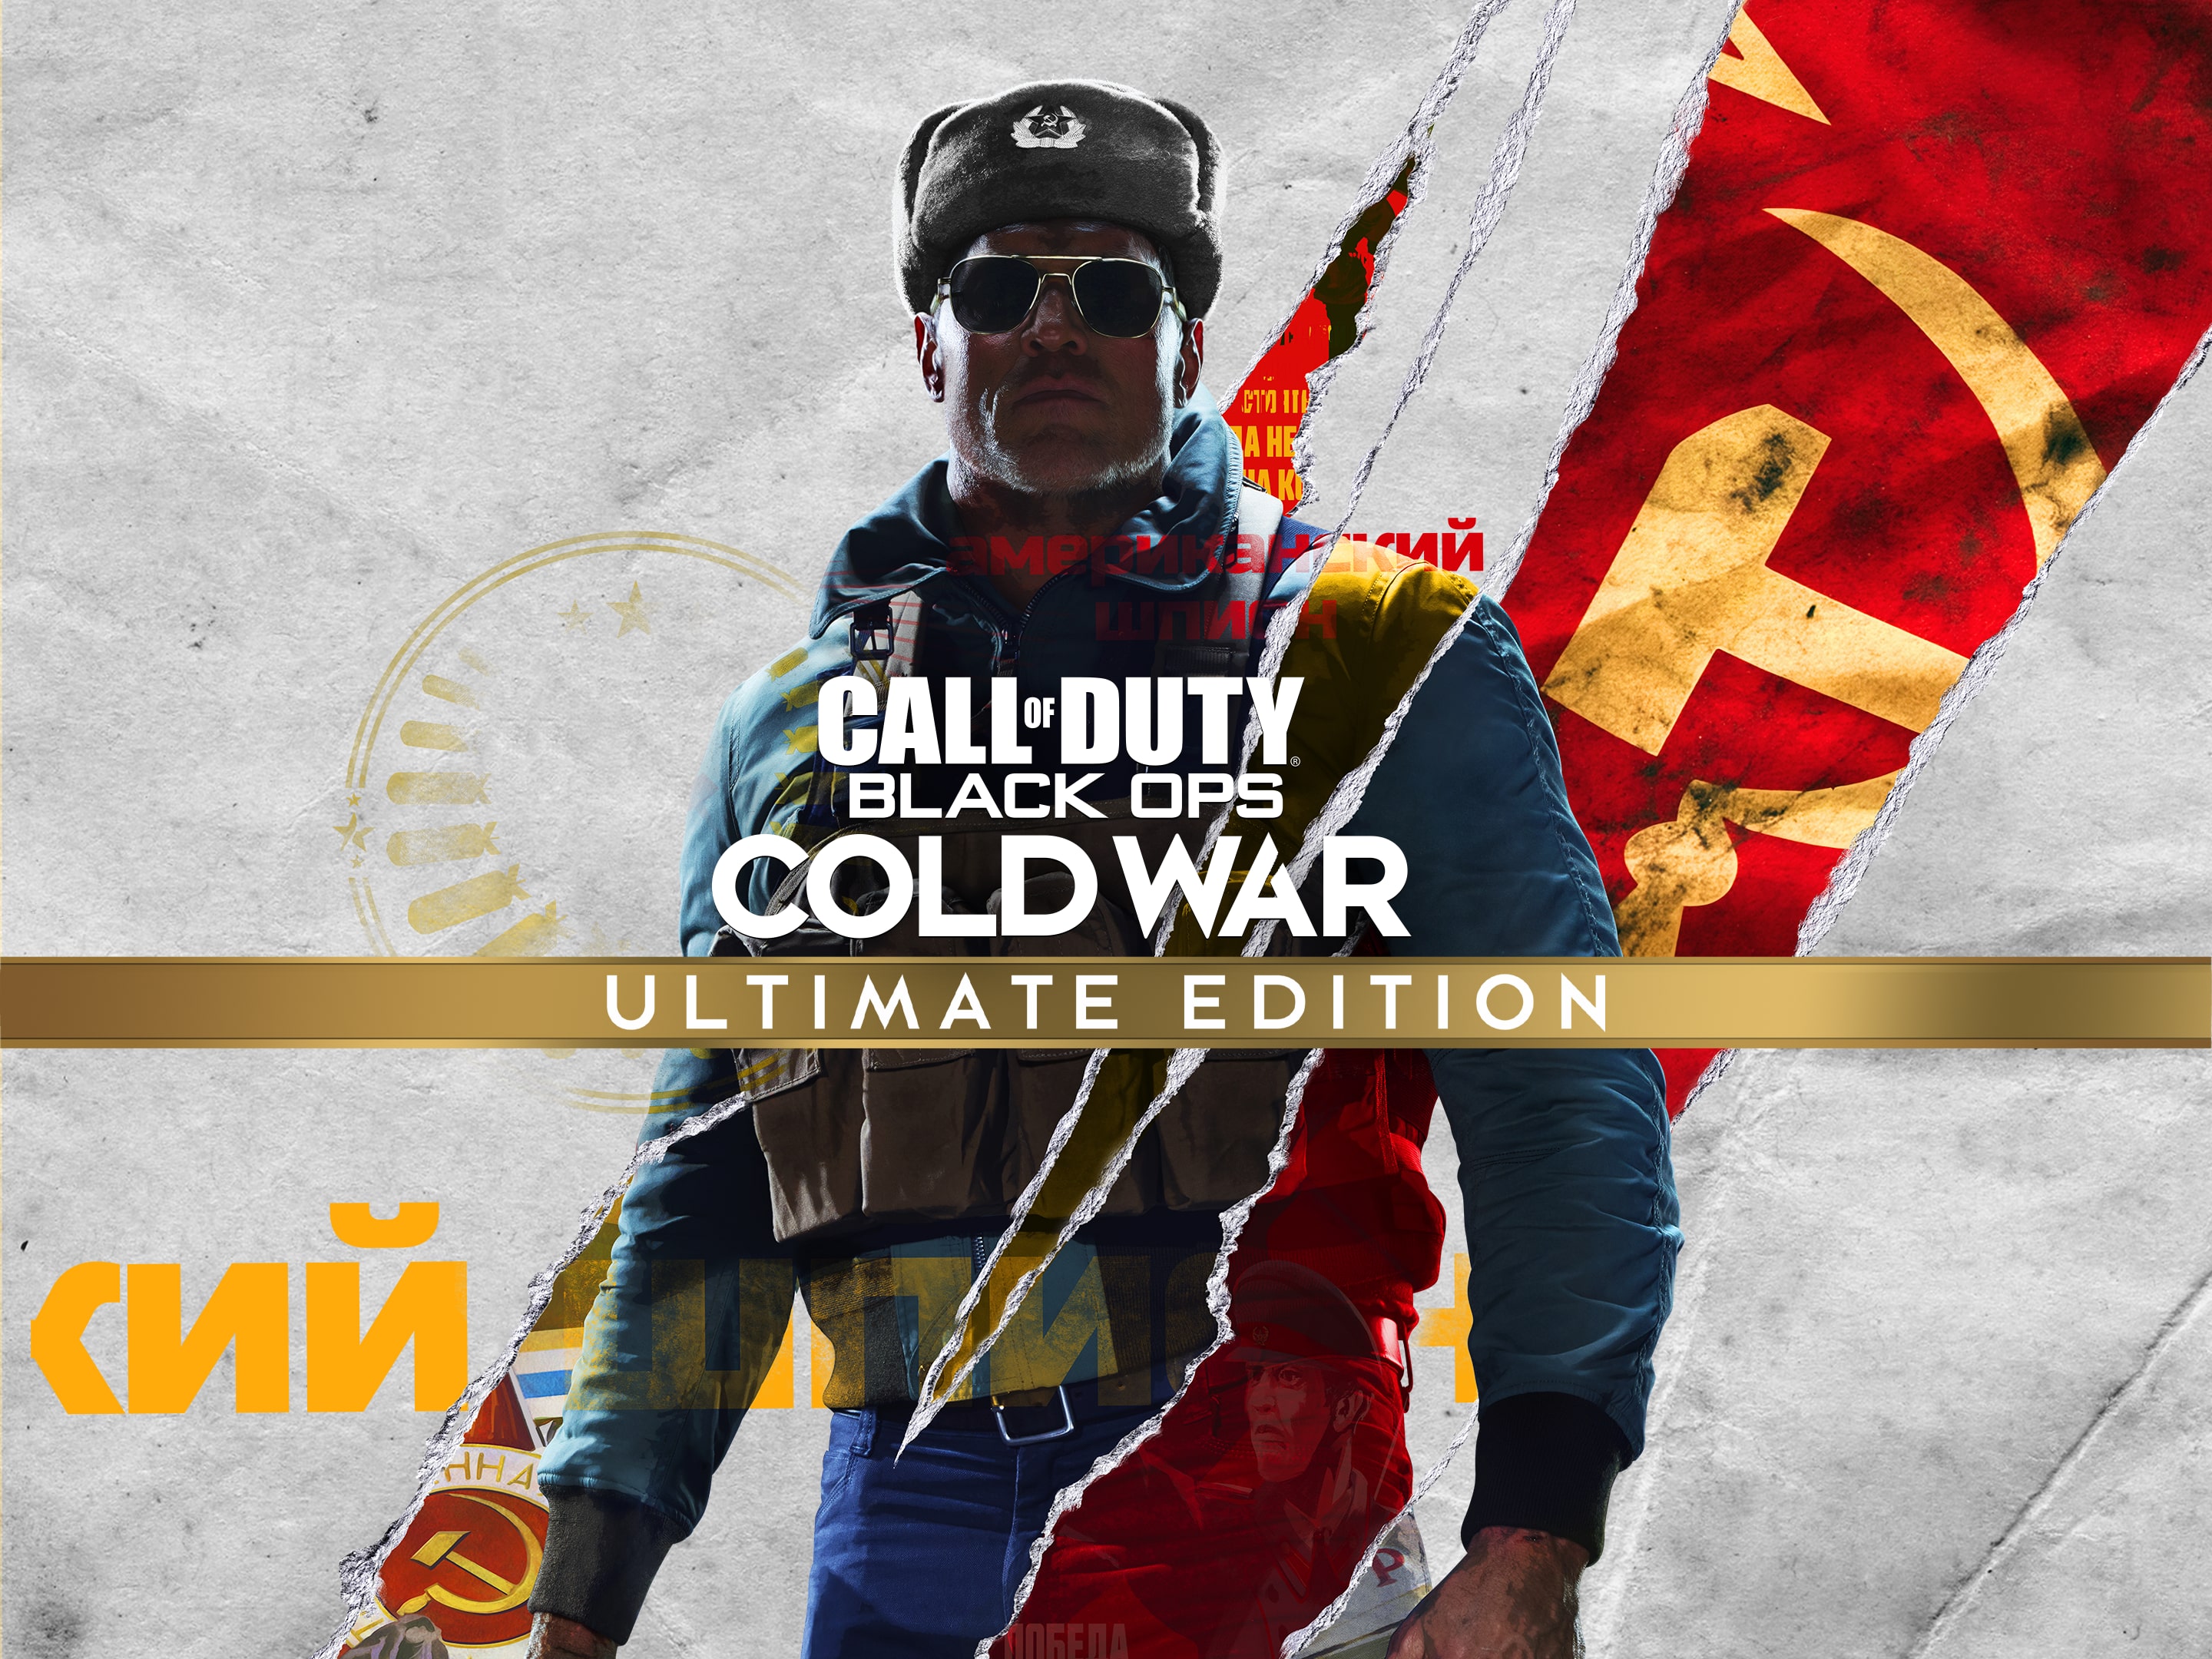 cold war price ps4